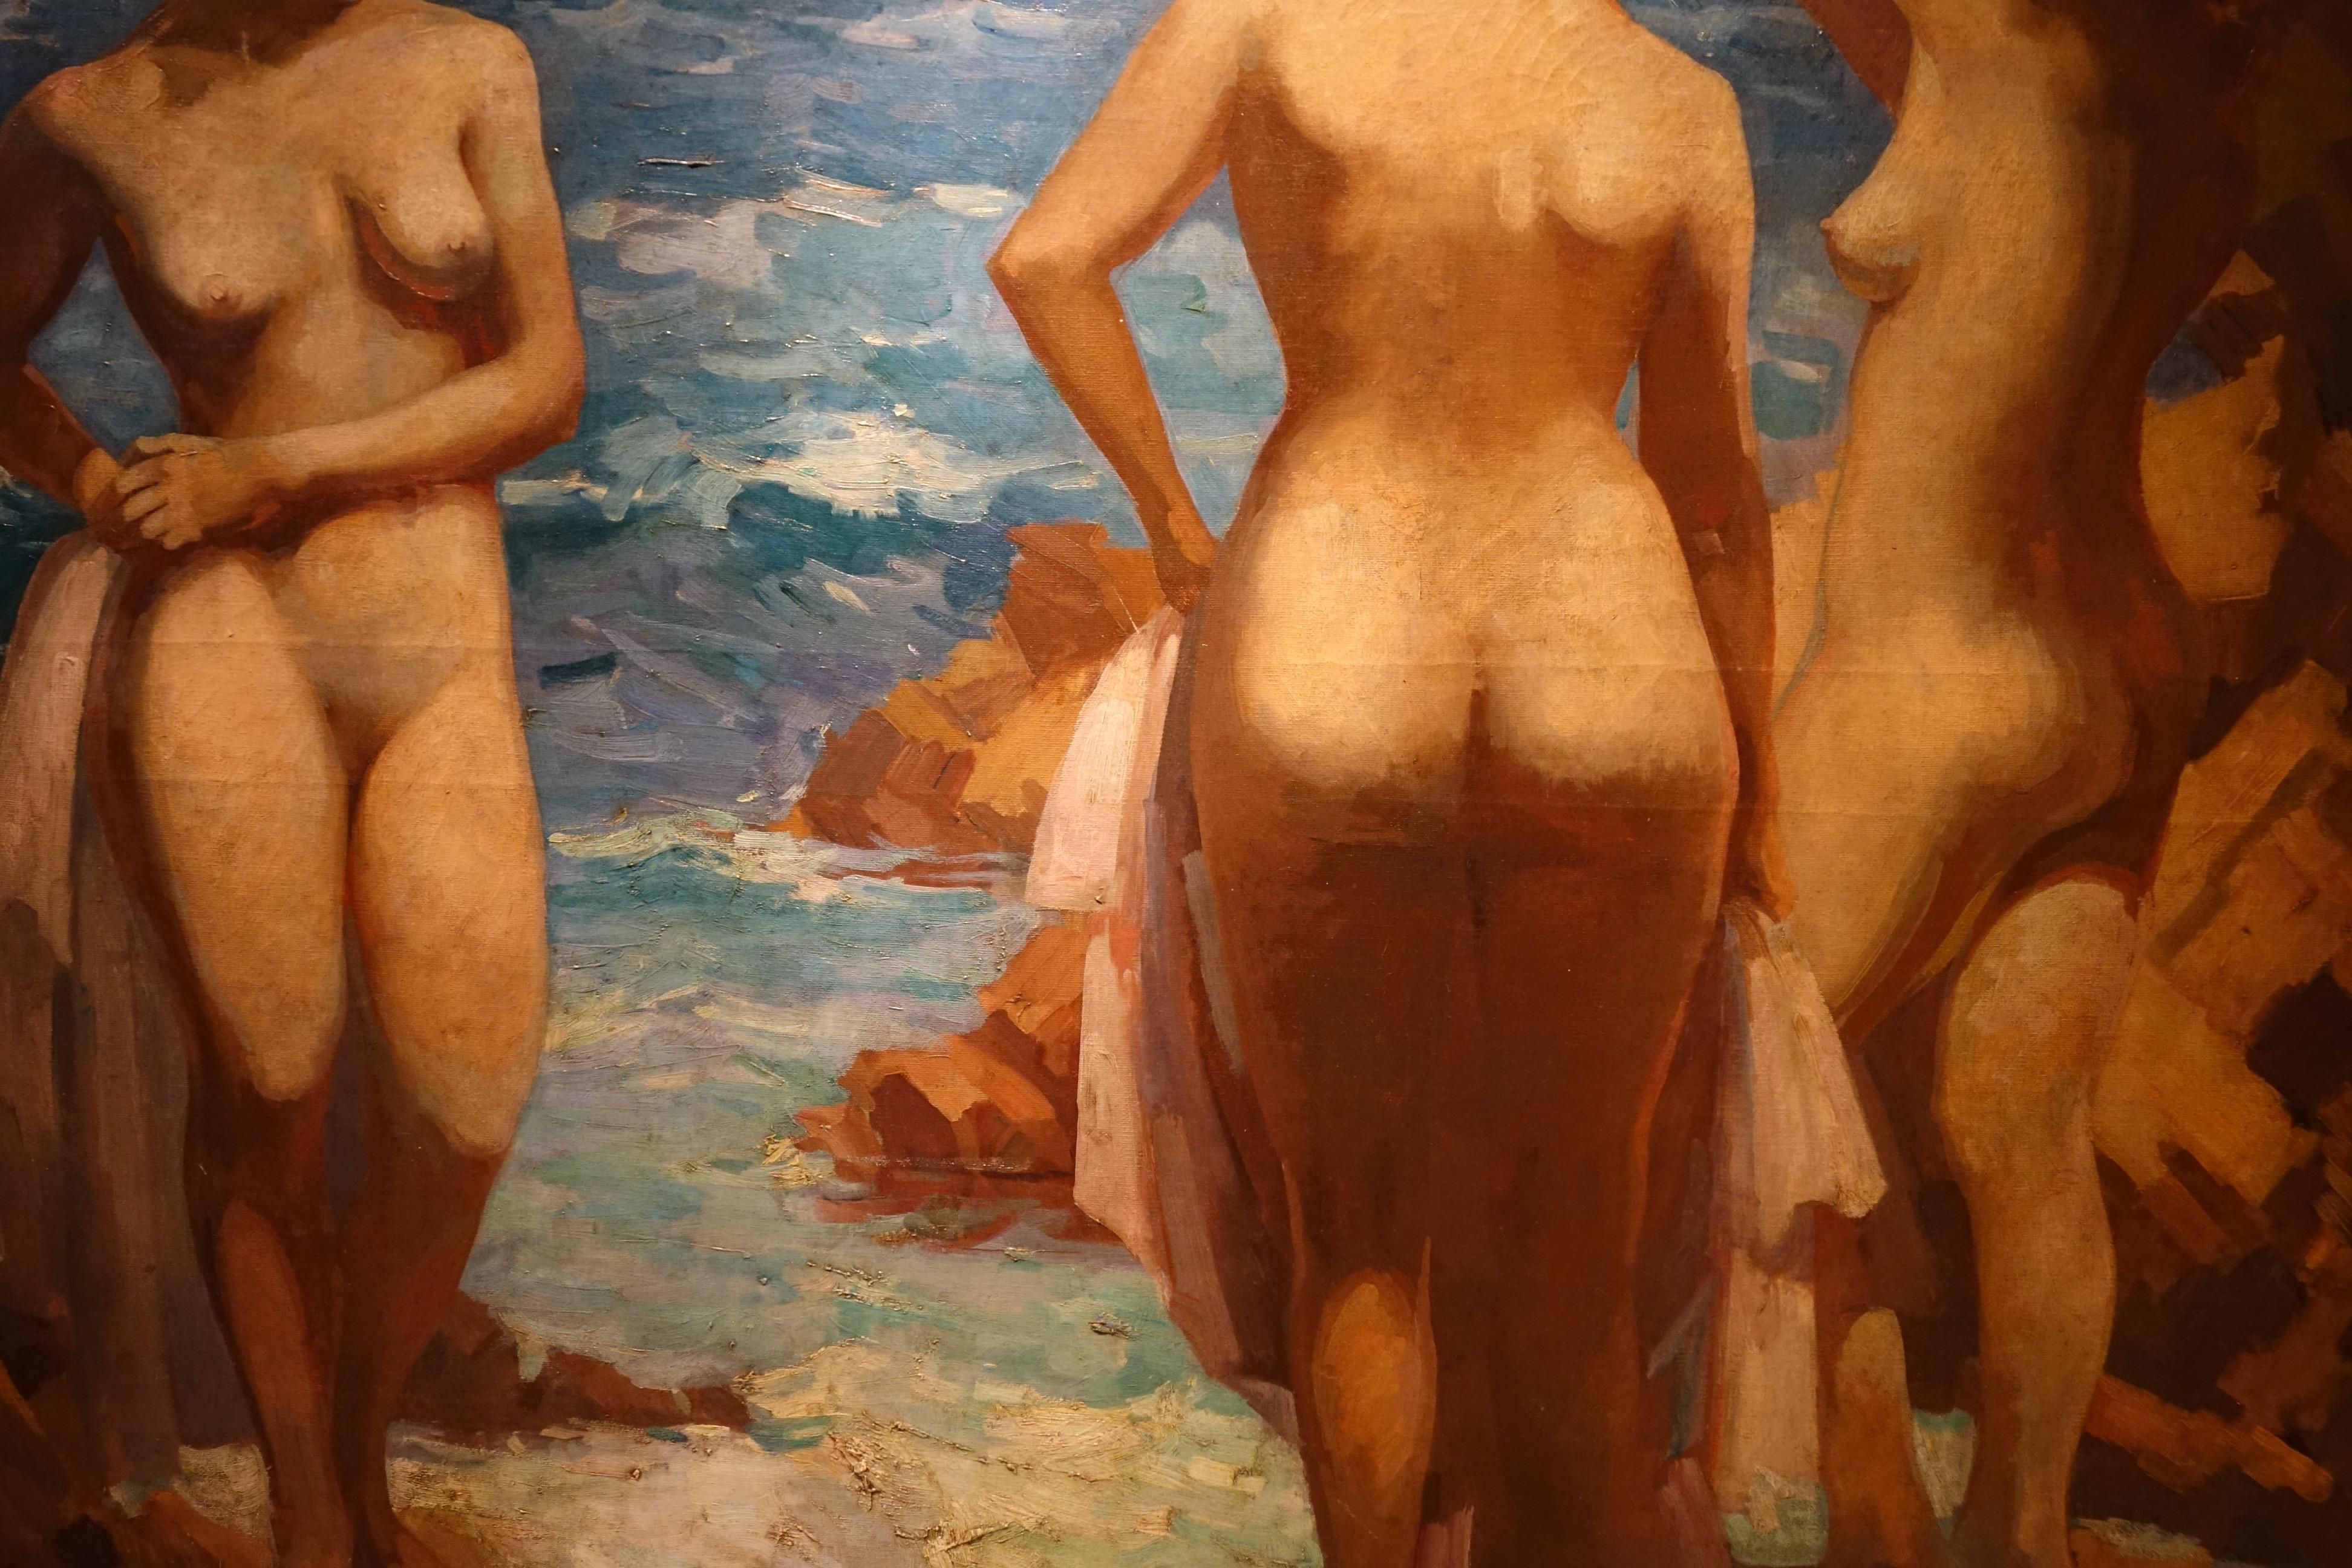 Mid-20th Century Three Naked Bathers By The Sea, Oil On Canvas Signed Kinder, Circa 1930 For Sale